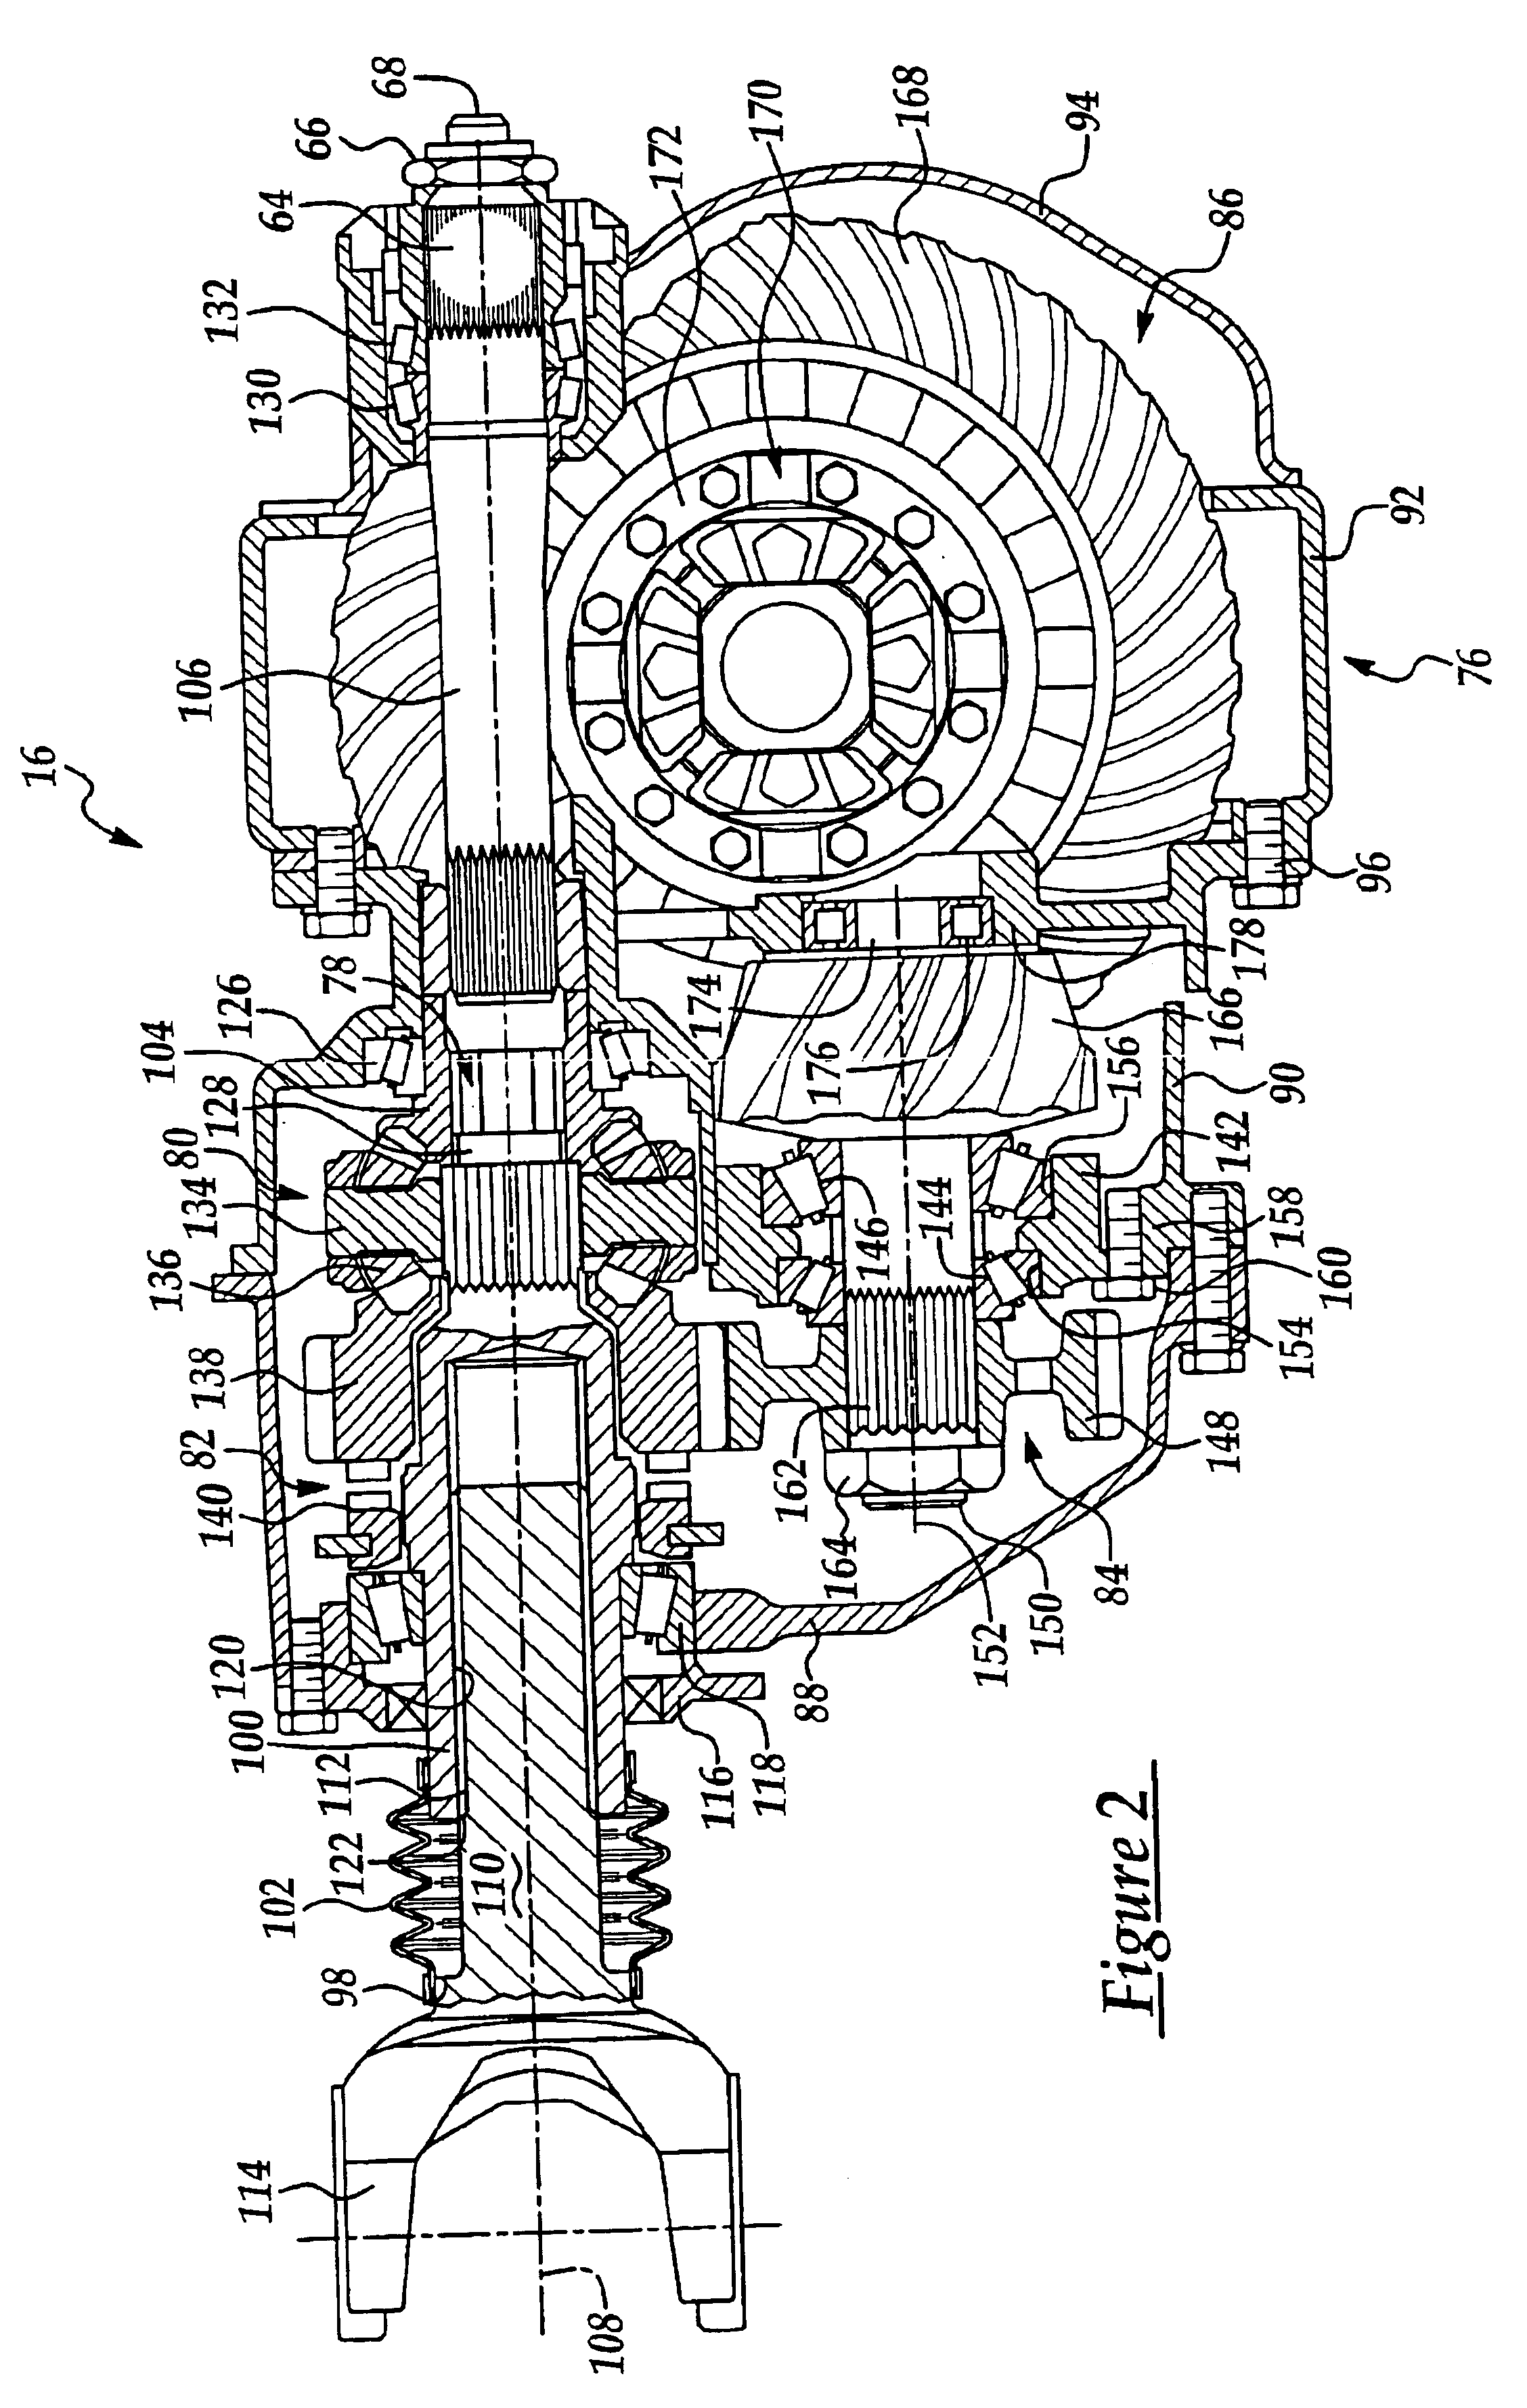 Tandem axle power divider assembly with inboard slip driveshaft connection